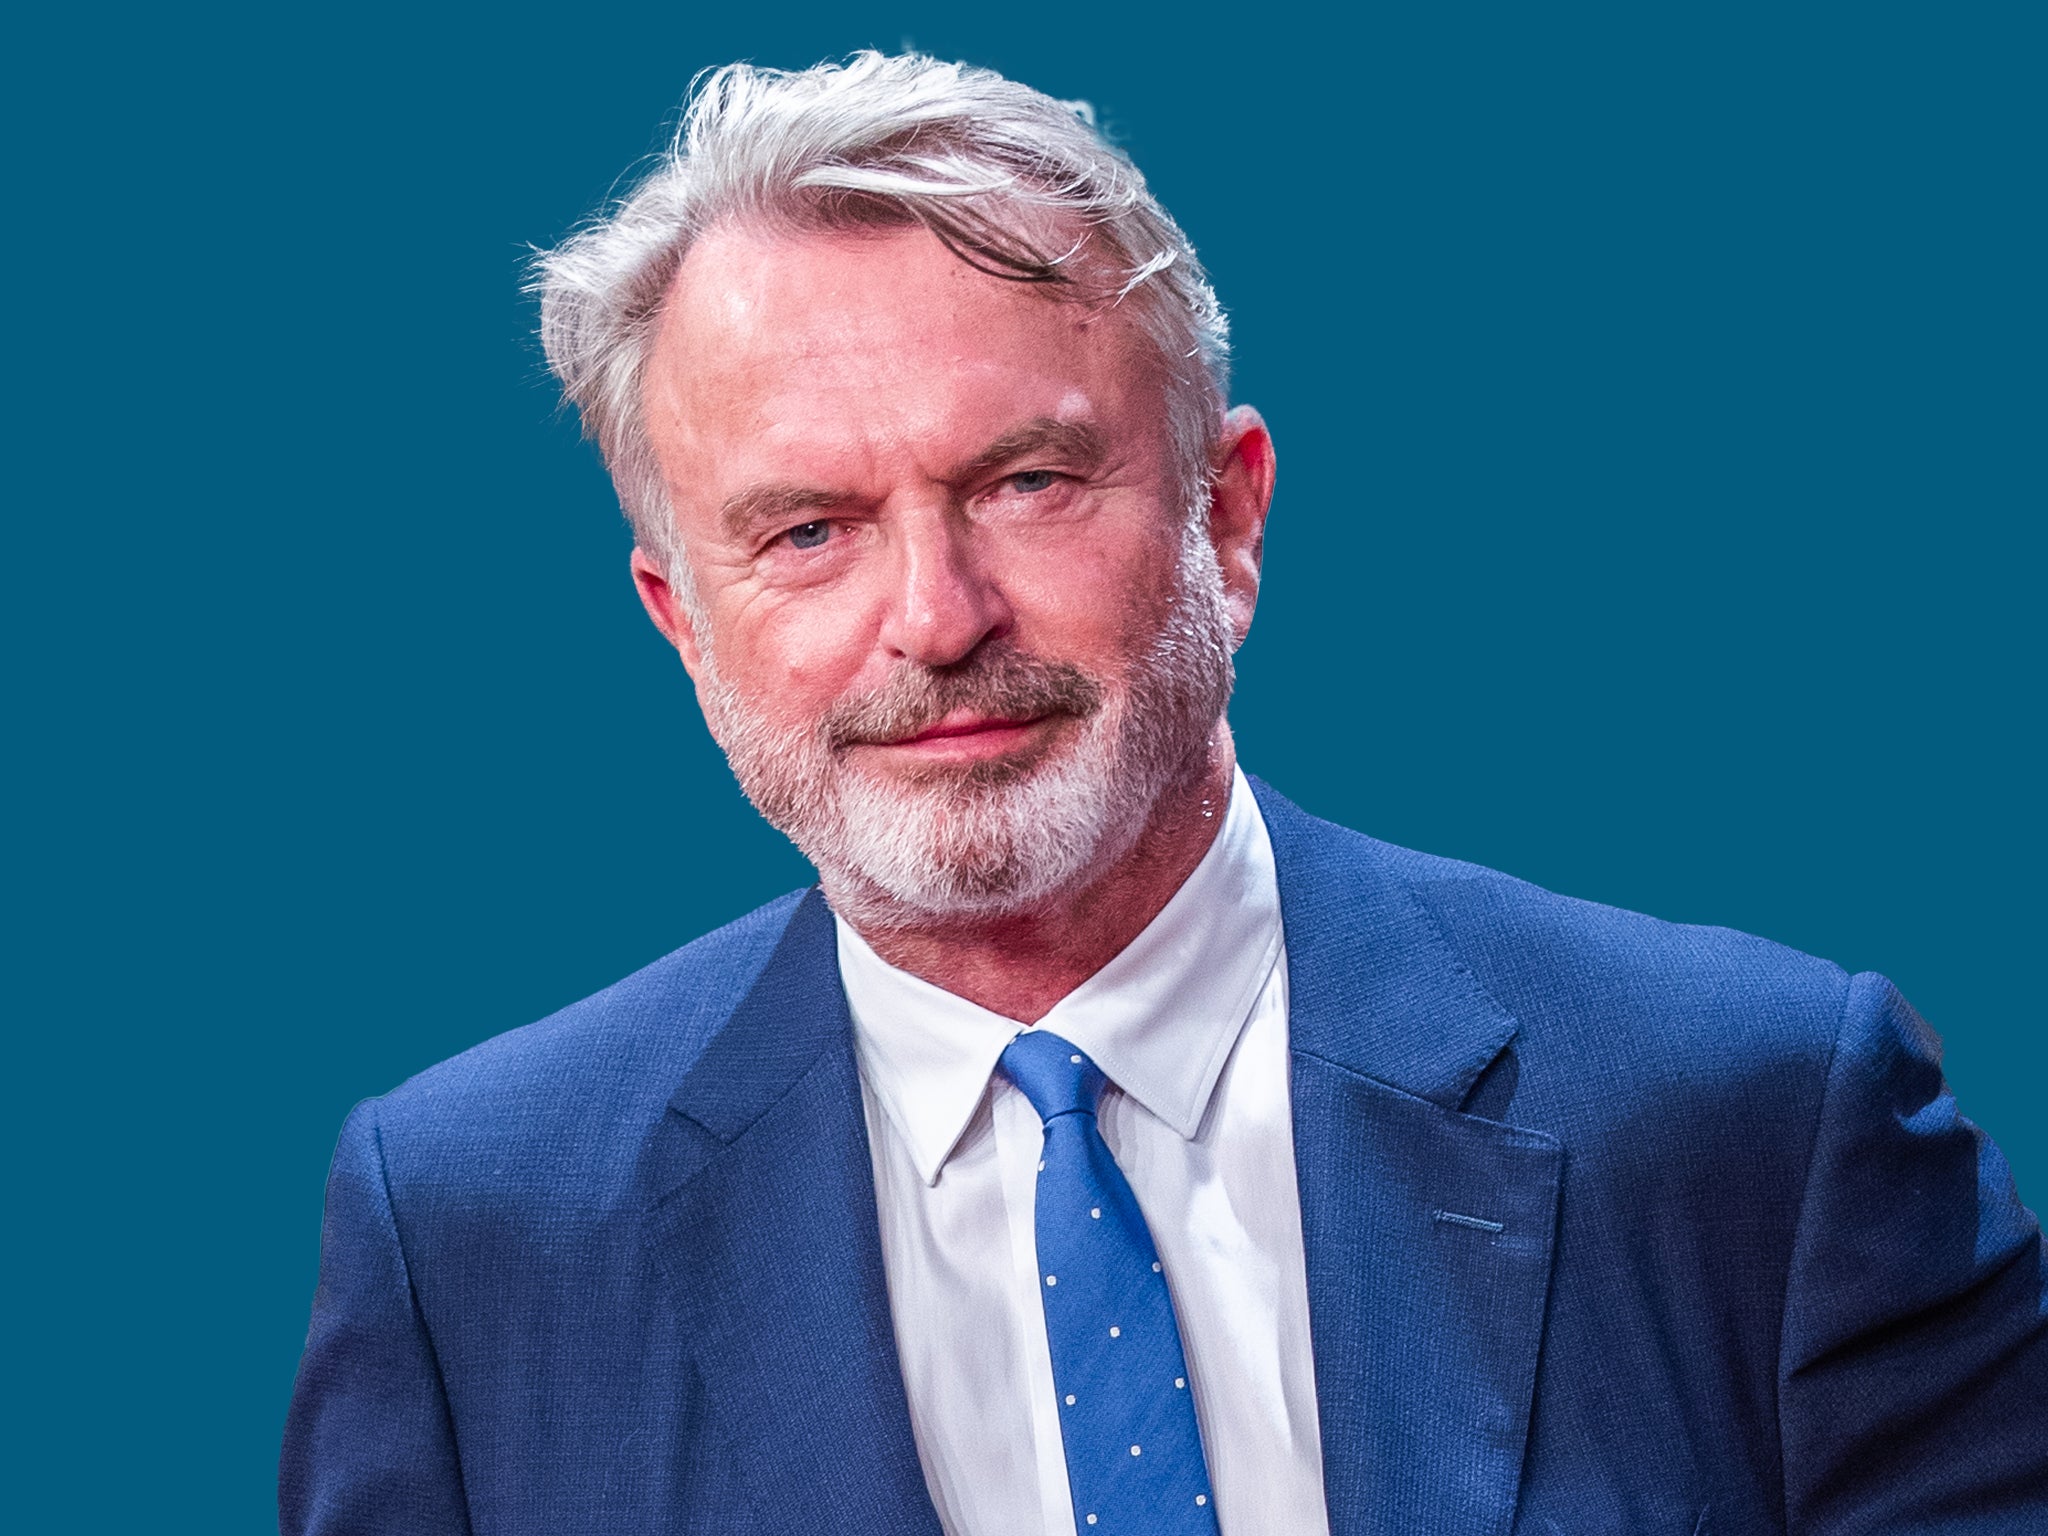 Sam Neill: ‘These people in their soiled underwear in their basements. Anonymity brings out the worst in people’